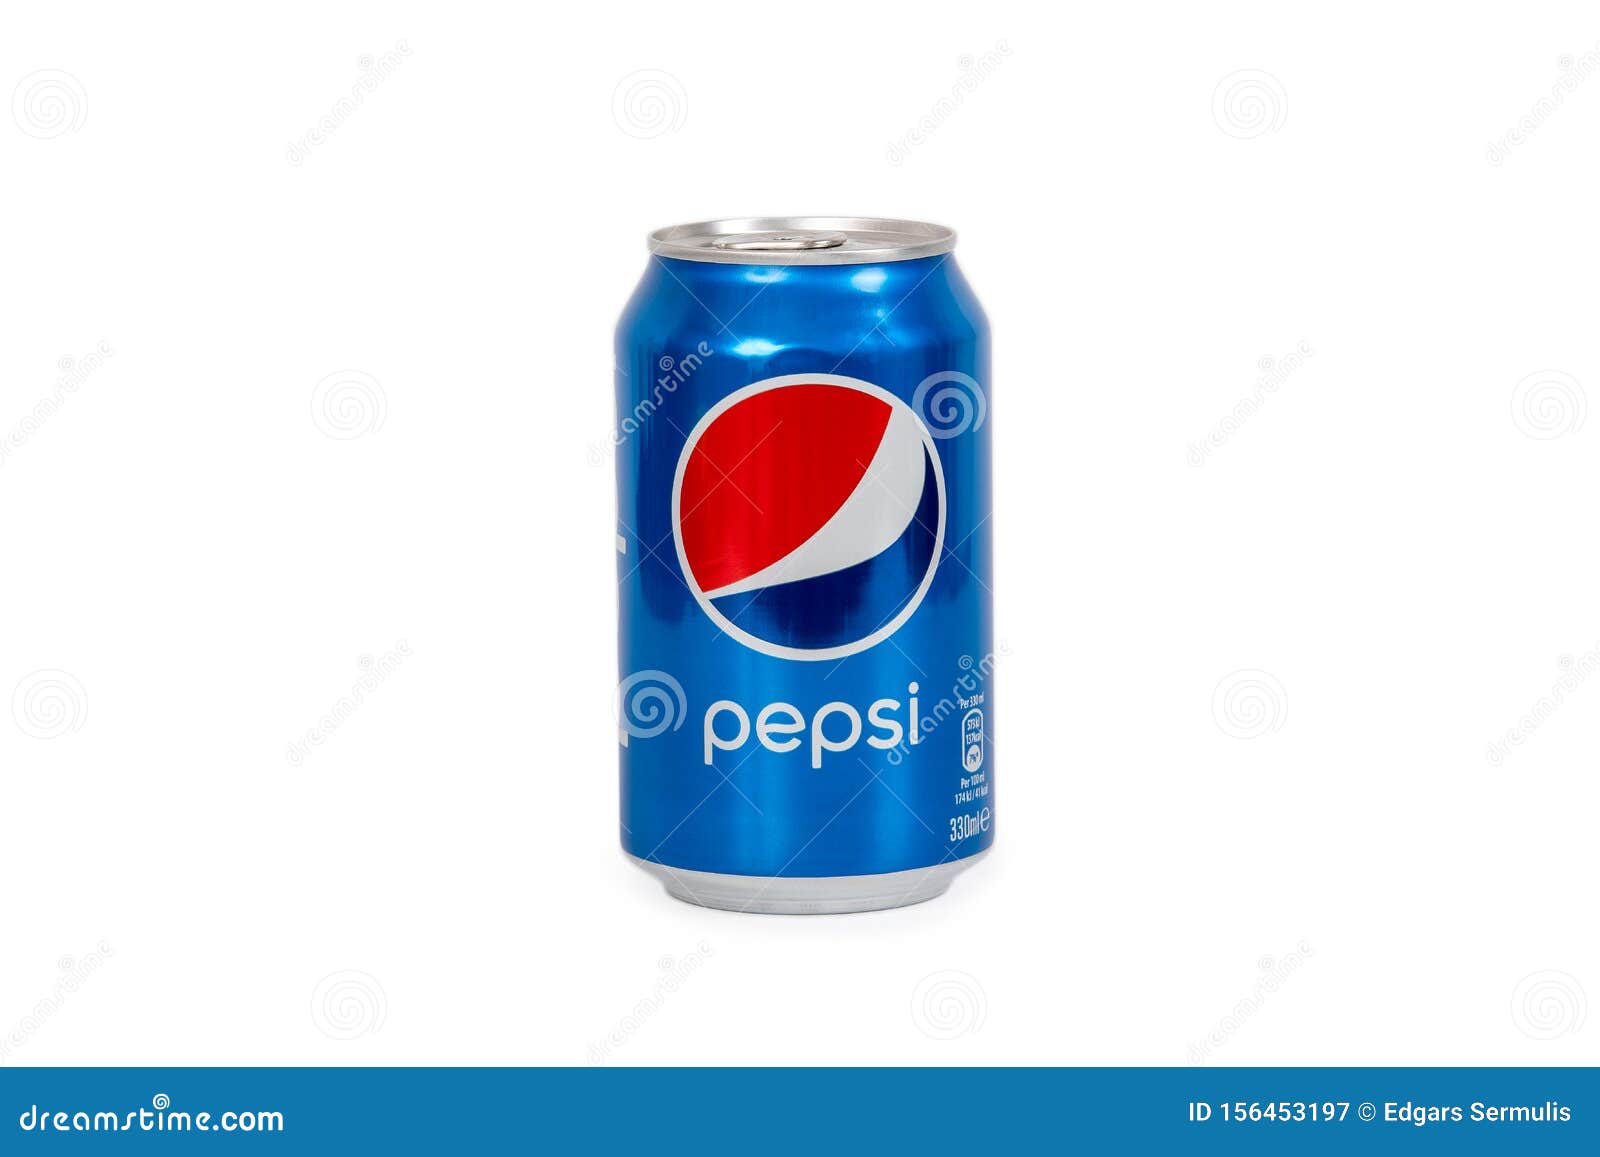 330ml Pepsi Can Isolated on White Background Editorial Photography ...